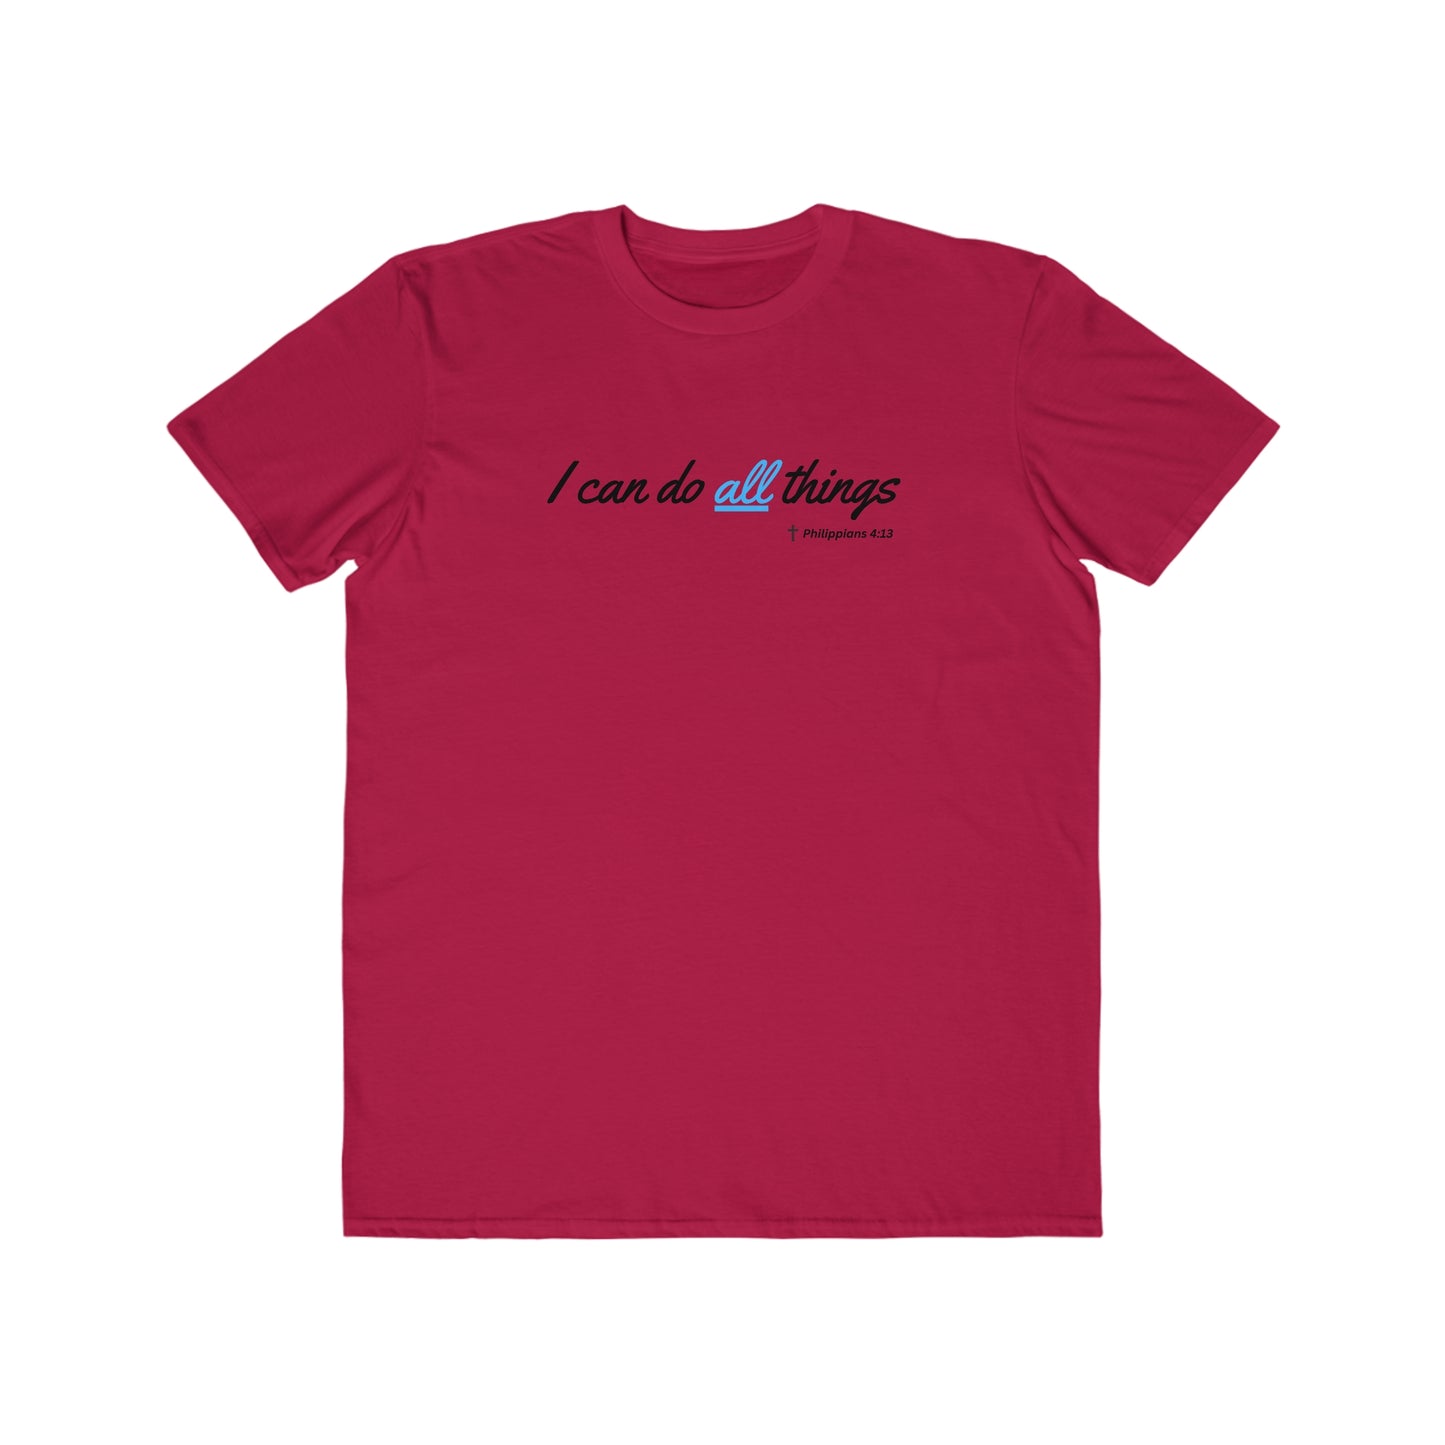 I Can Do All Things Men's Lightweight Fashion Tee